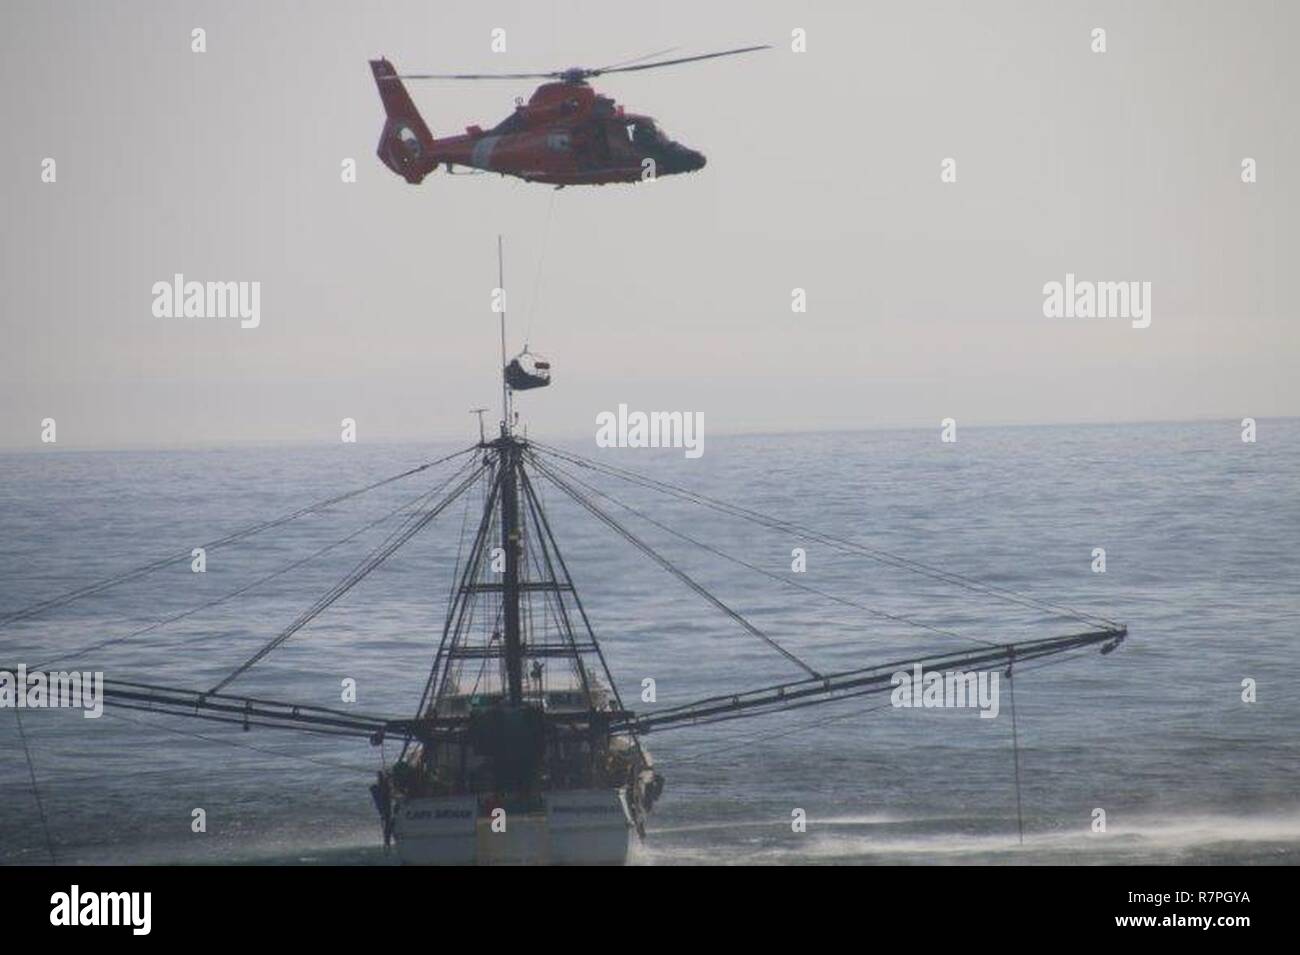 A helicopter from Air Station Atlantic City in Egg Harbor Township, NJ, hovers close to the Capt Nathan trawler 50 miles east of Chincoteague, Virginia, Sunday, March 26, 2017. The Coast Guard medevaced the captain of the trawler after it was reported he was suffering stroke-like symptons. Stock Photo